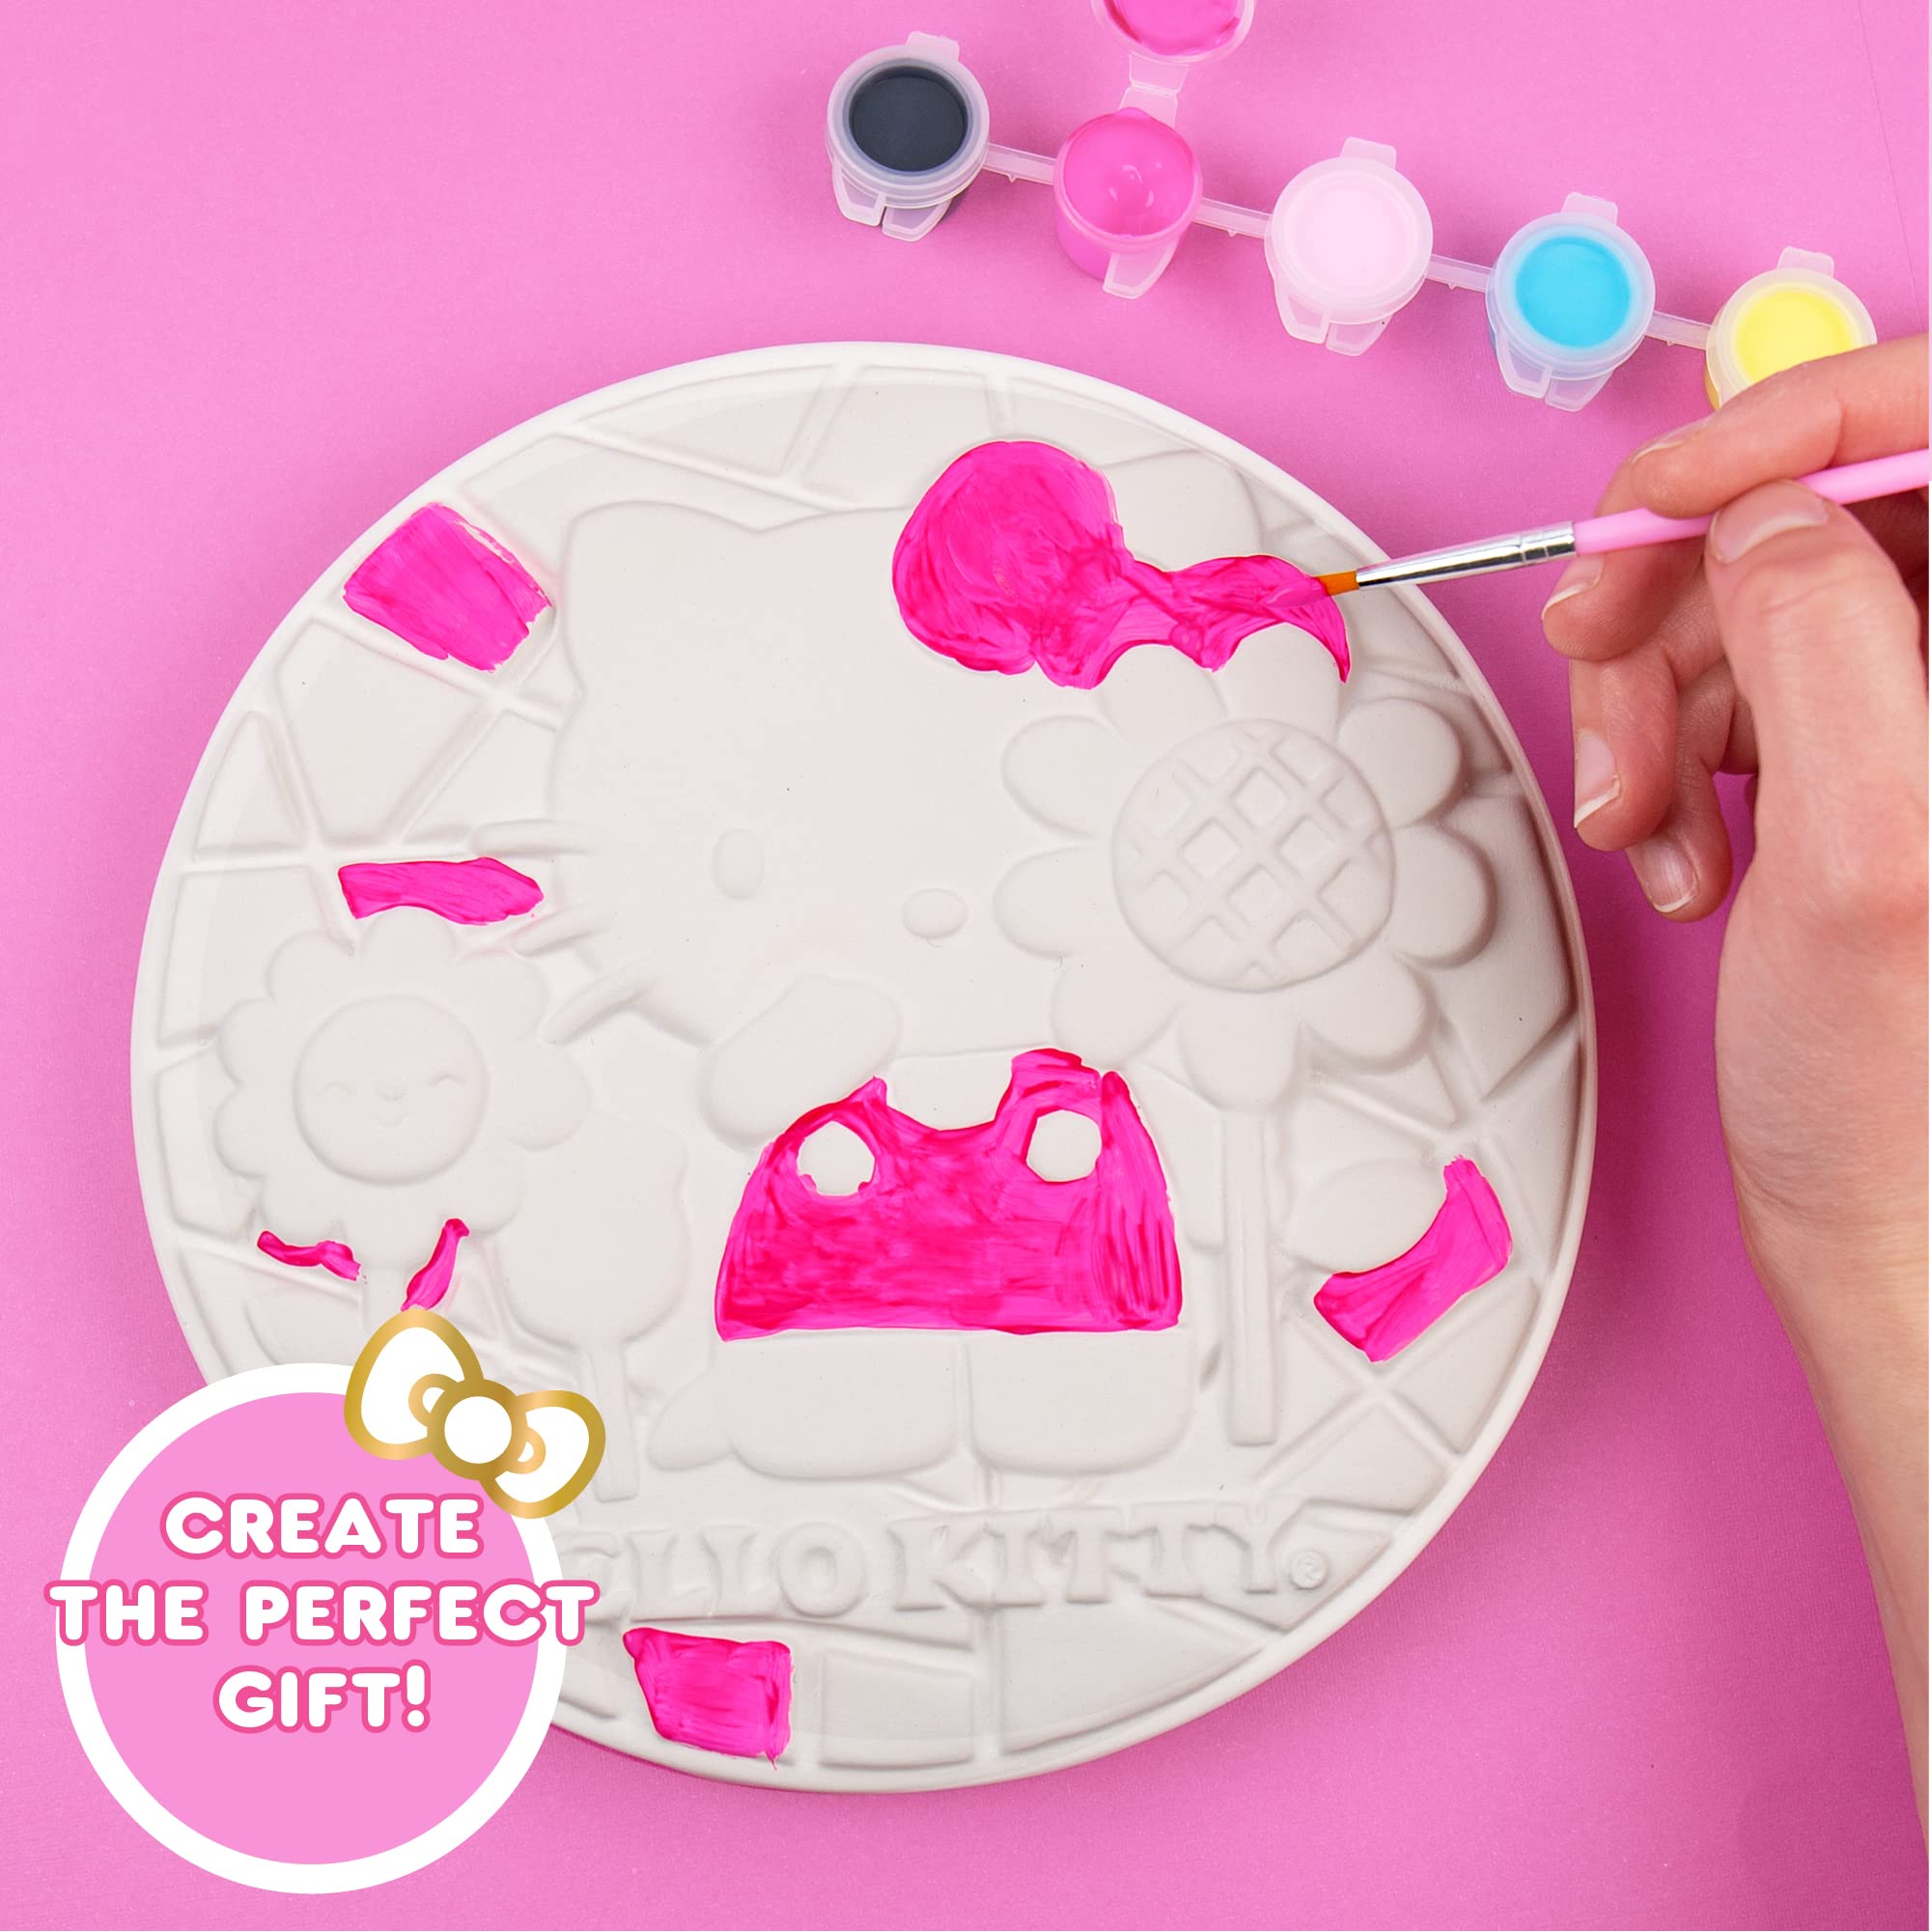 Sanrio Hello Kitty Paint Your Own Stepping Stone, Includes 7” Stepping Stone, 6 Paints & 1 Paintbrush, Cute Gifts for Kids Teens Girls Adults